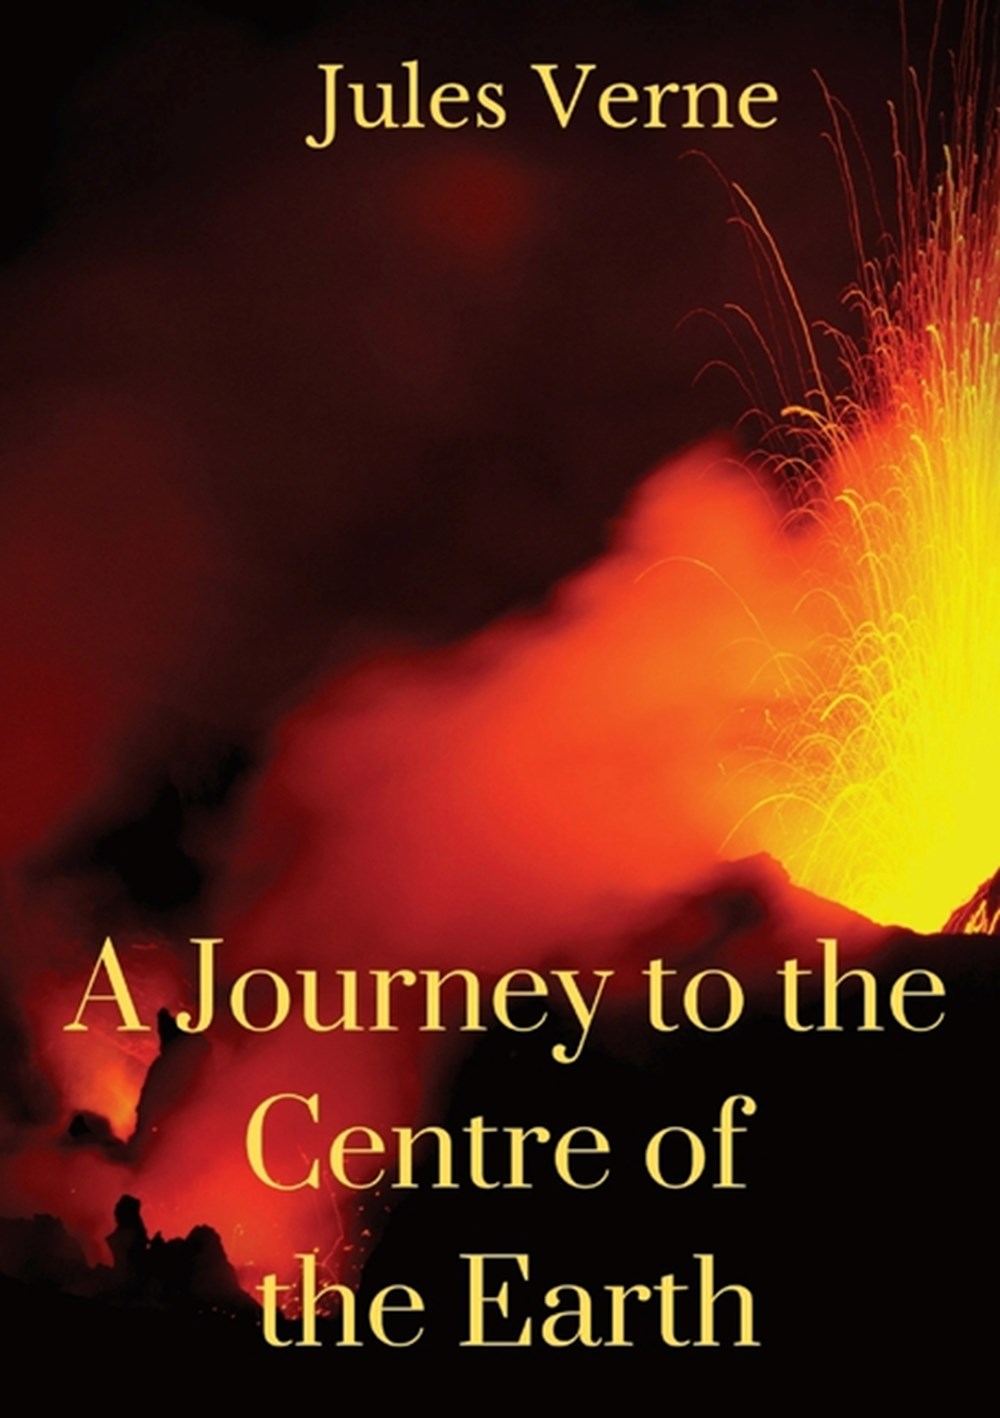 Journey to the Centre of the Earth: A 1864 science fiction novel by Jules Verne involving German pro